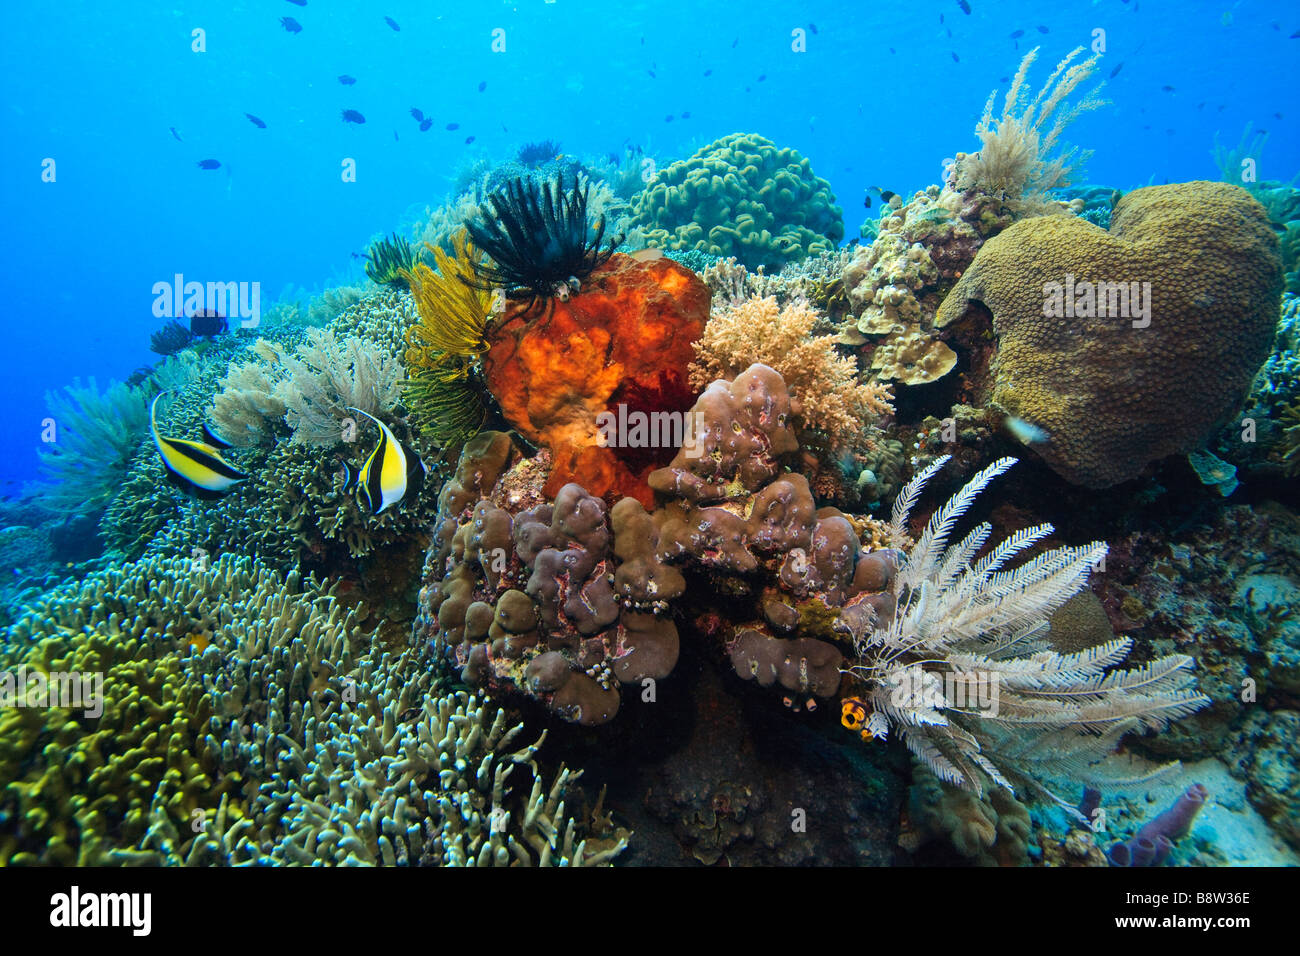 Coral reefs off the island of Bunaken in North Sulawesi Indonesia Stock Photo